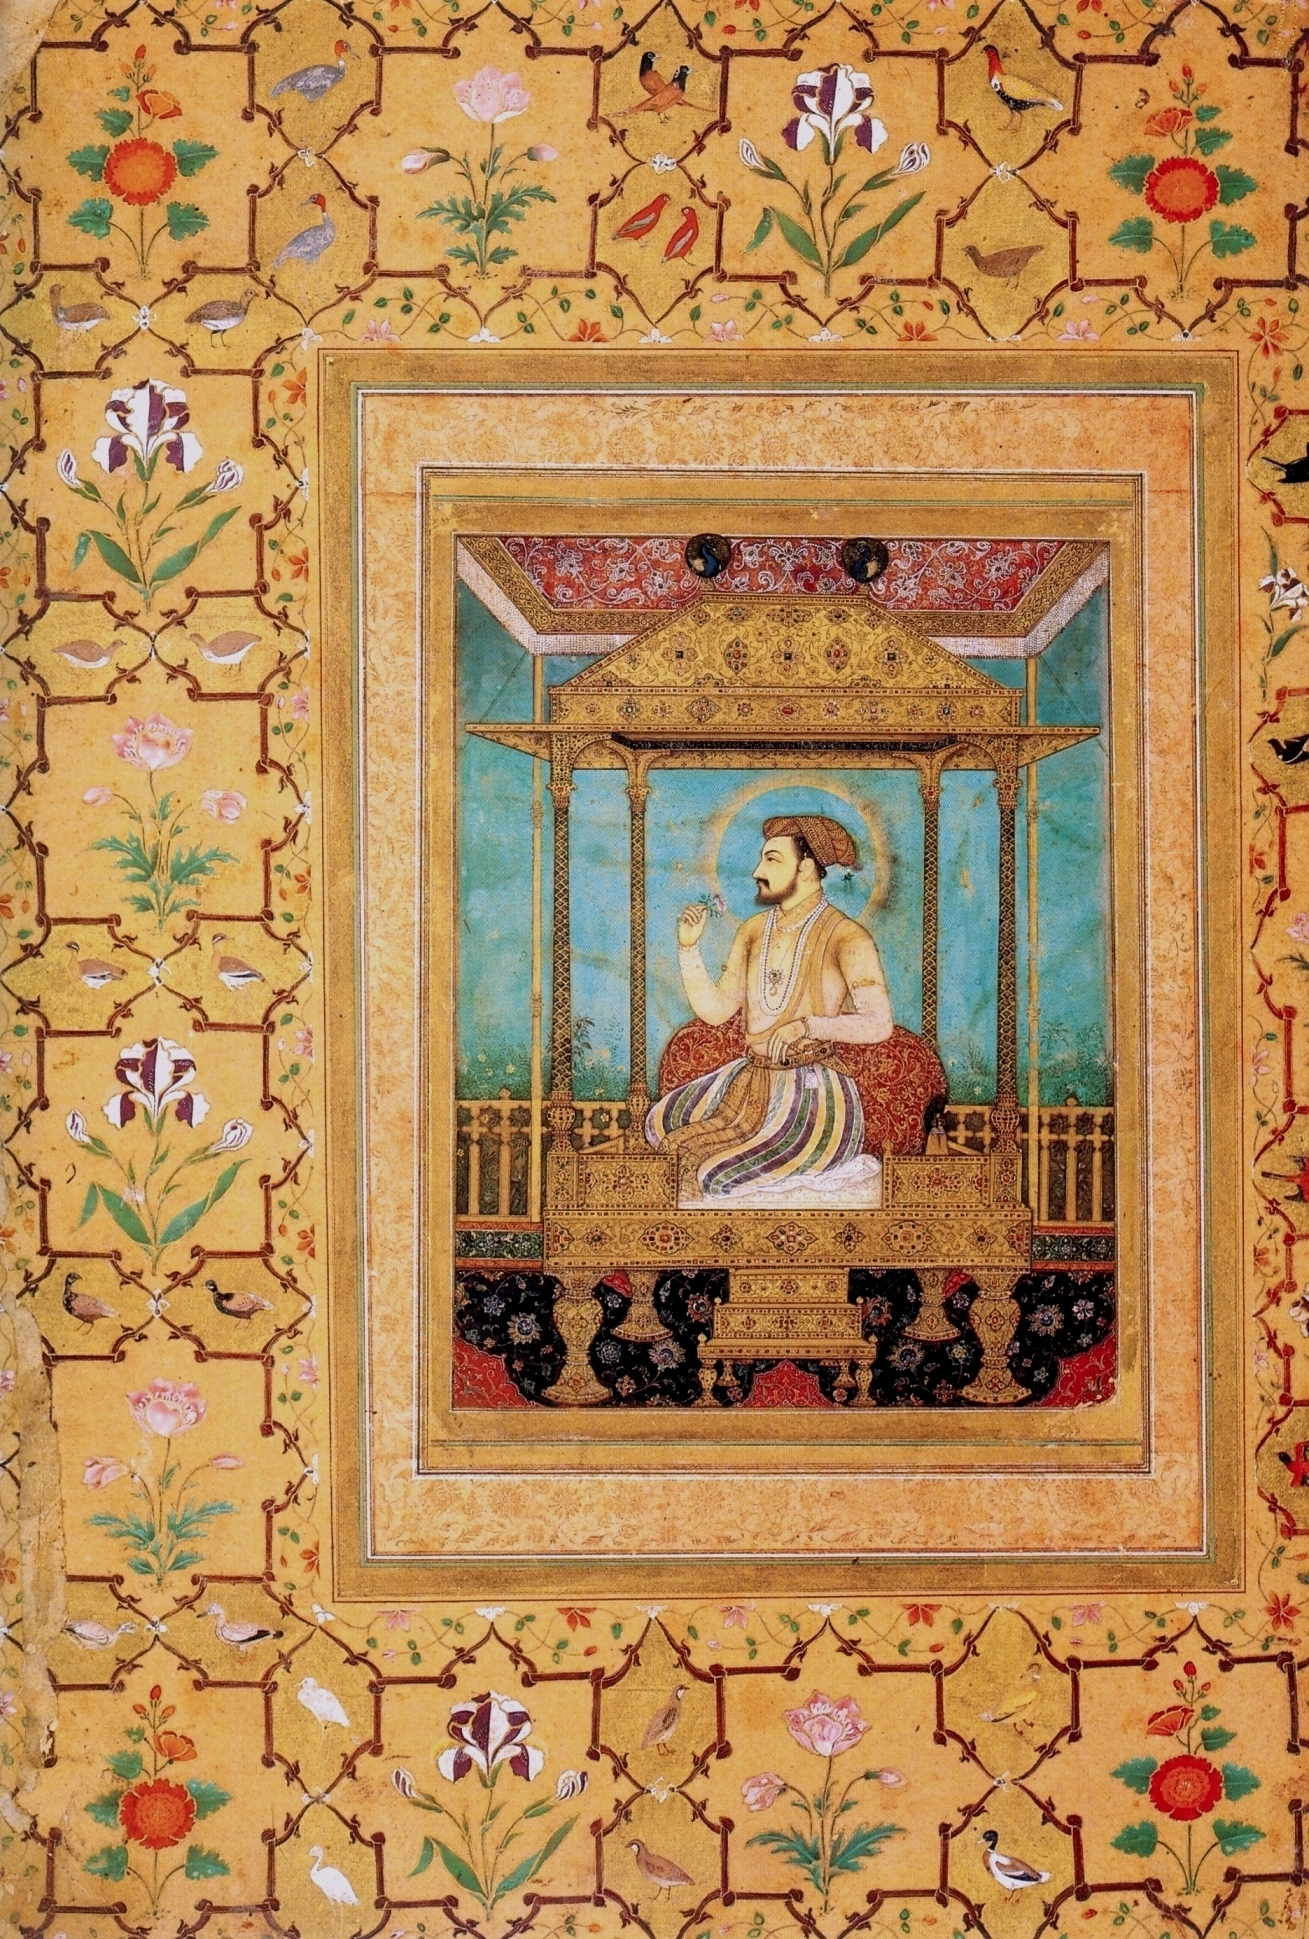 Shah Jahan On The Peacock Throne by Govardhan by  Govardhan - 1635 - 16,5 x 12.7 cm private collection